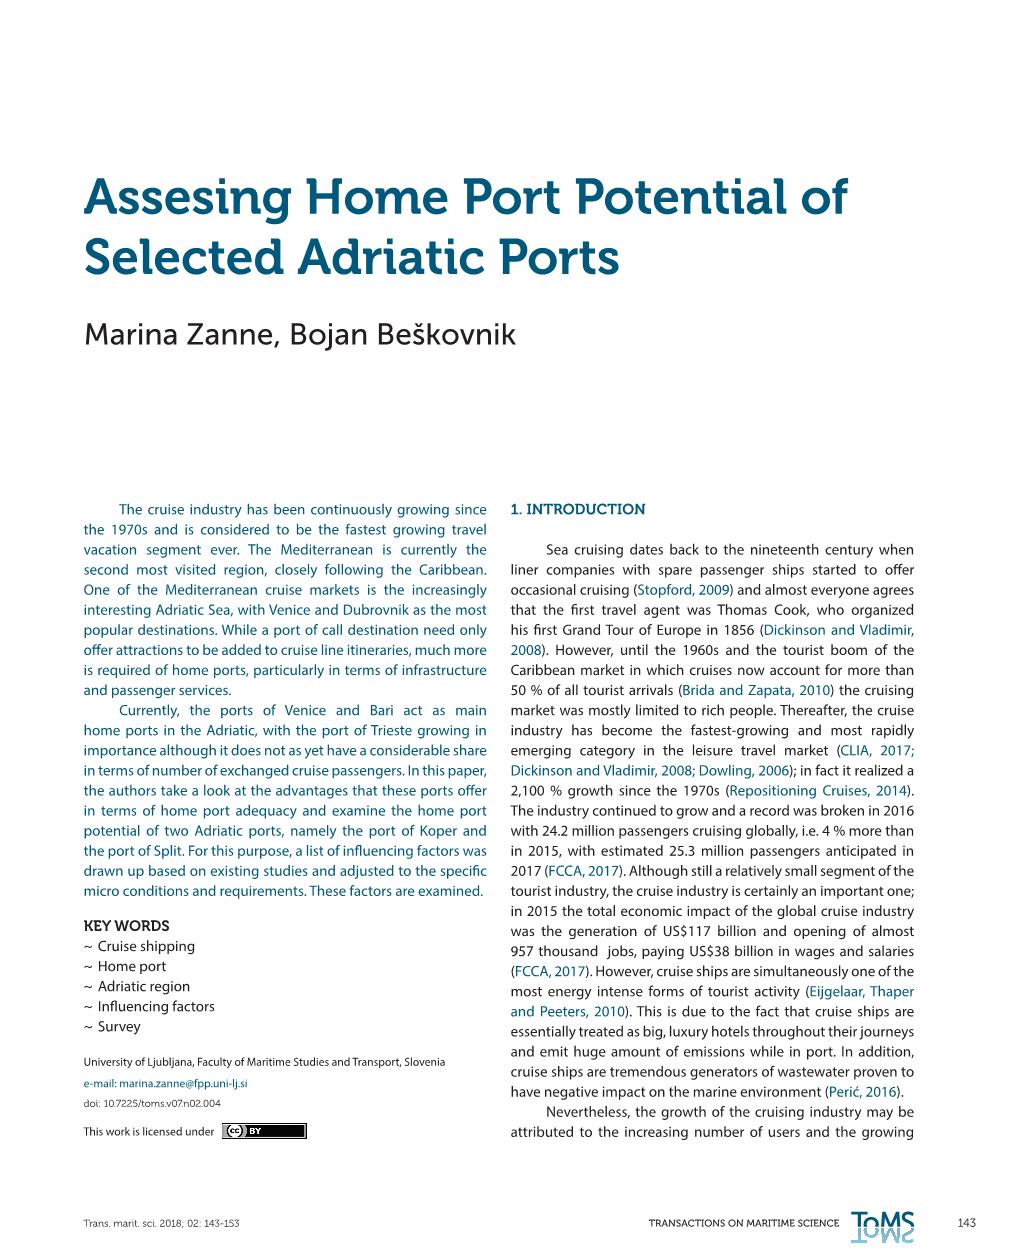 Assesing Home Port Potential of Selected Adriatic Ports